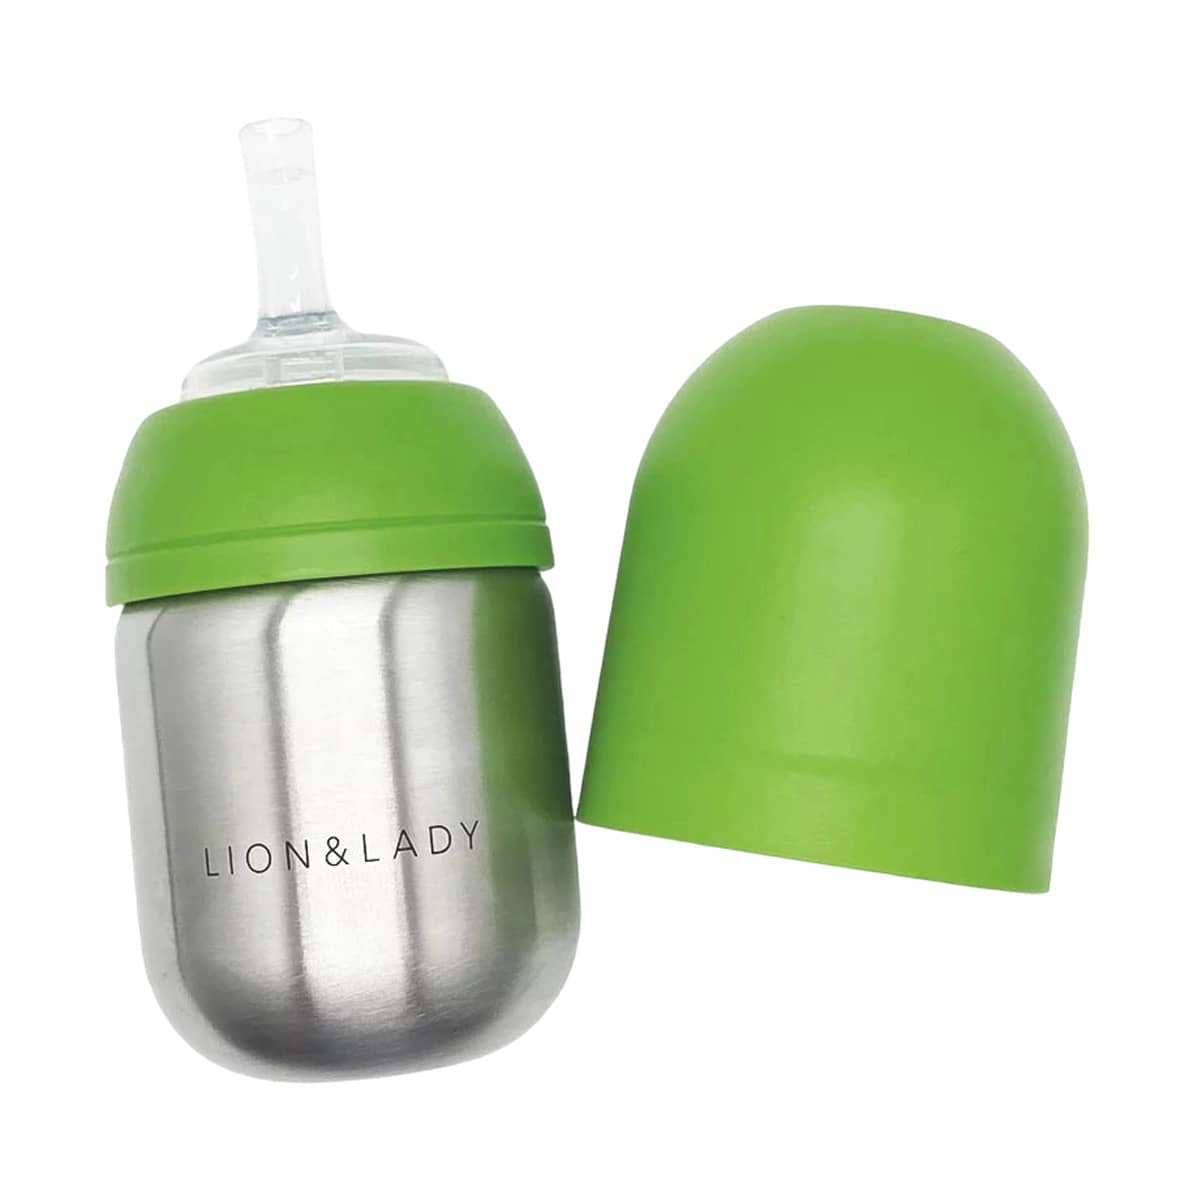 Lion & Lady Stainless Steel Toddler Straw Cup - 210ml - Green Apple